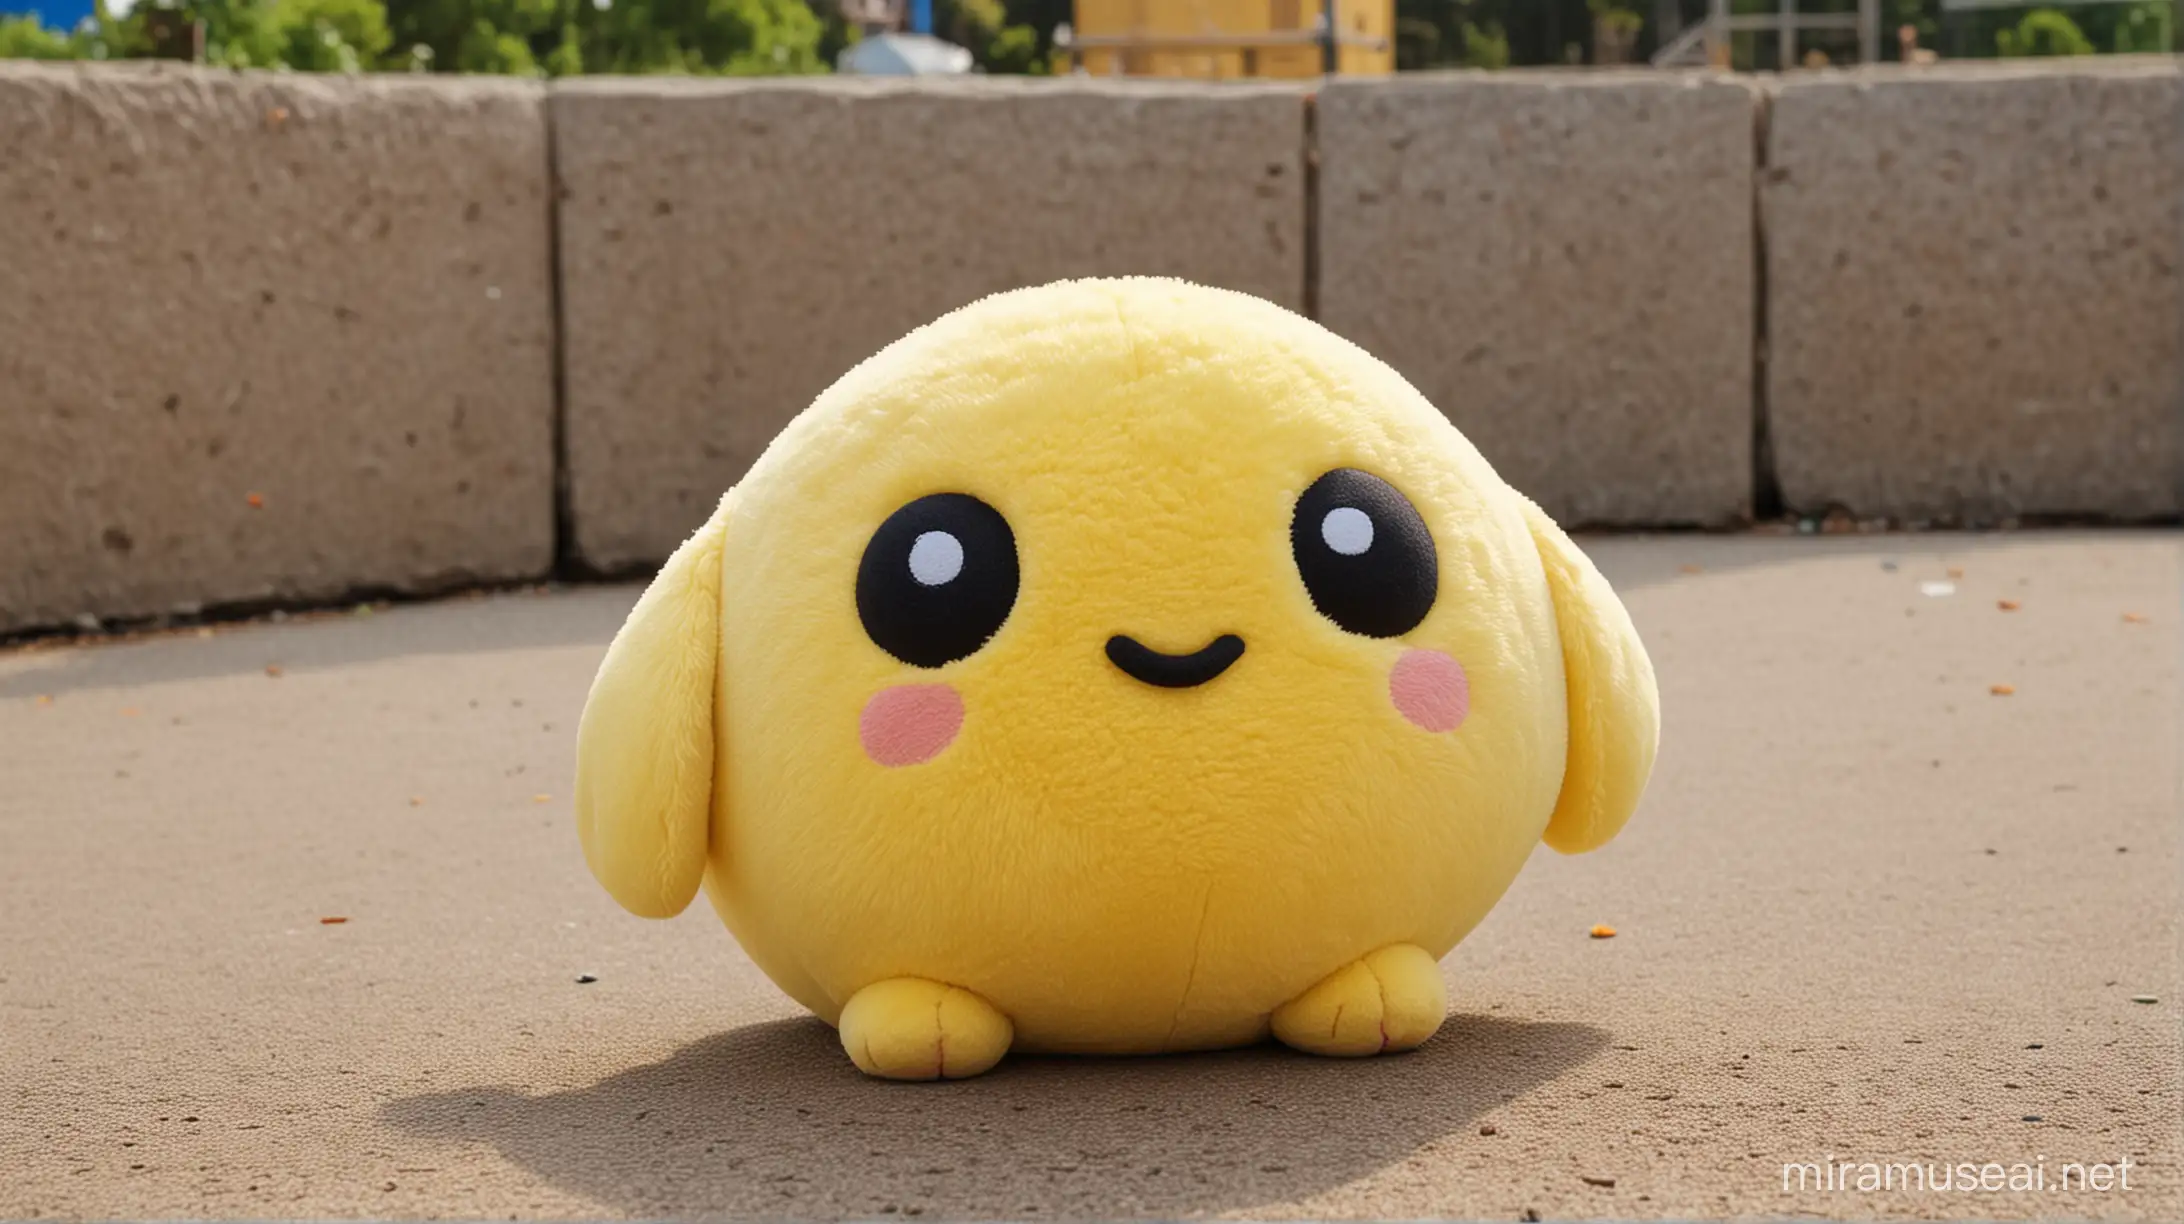 make 3D, yellow stuffed toy the shape of mochi, no mouth, simple black circles for eyes, background is a playground